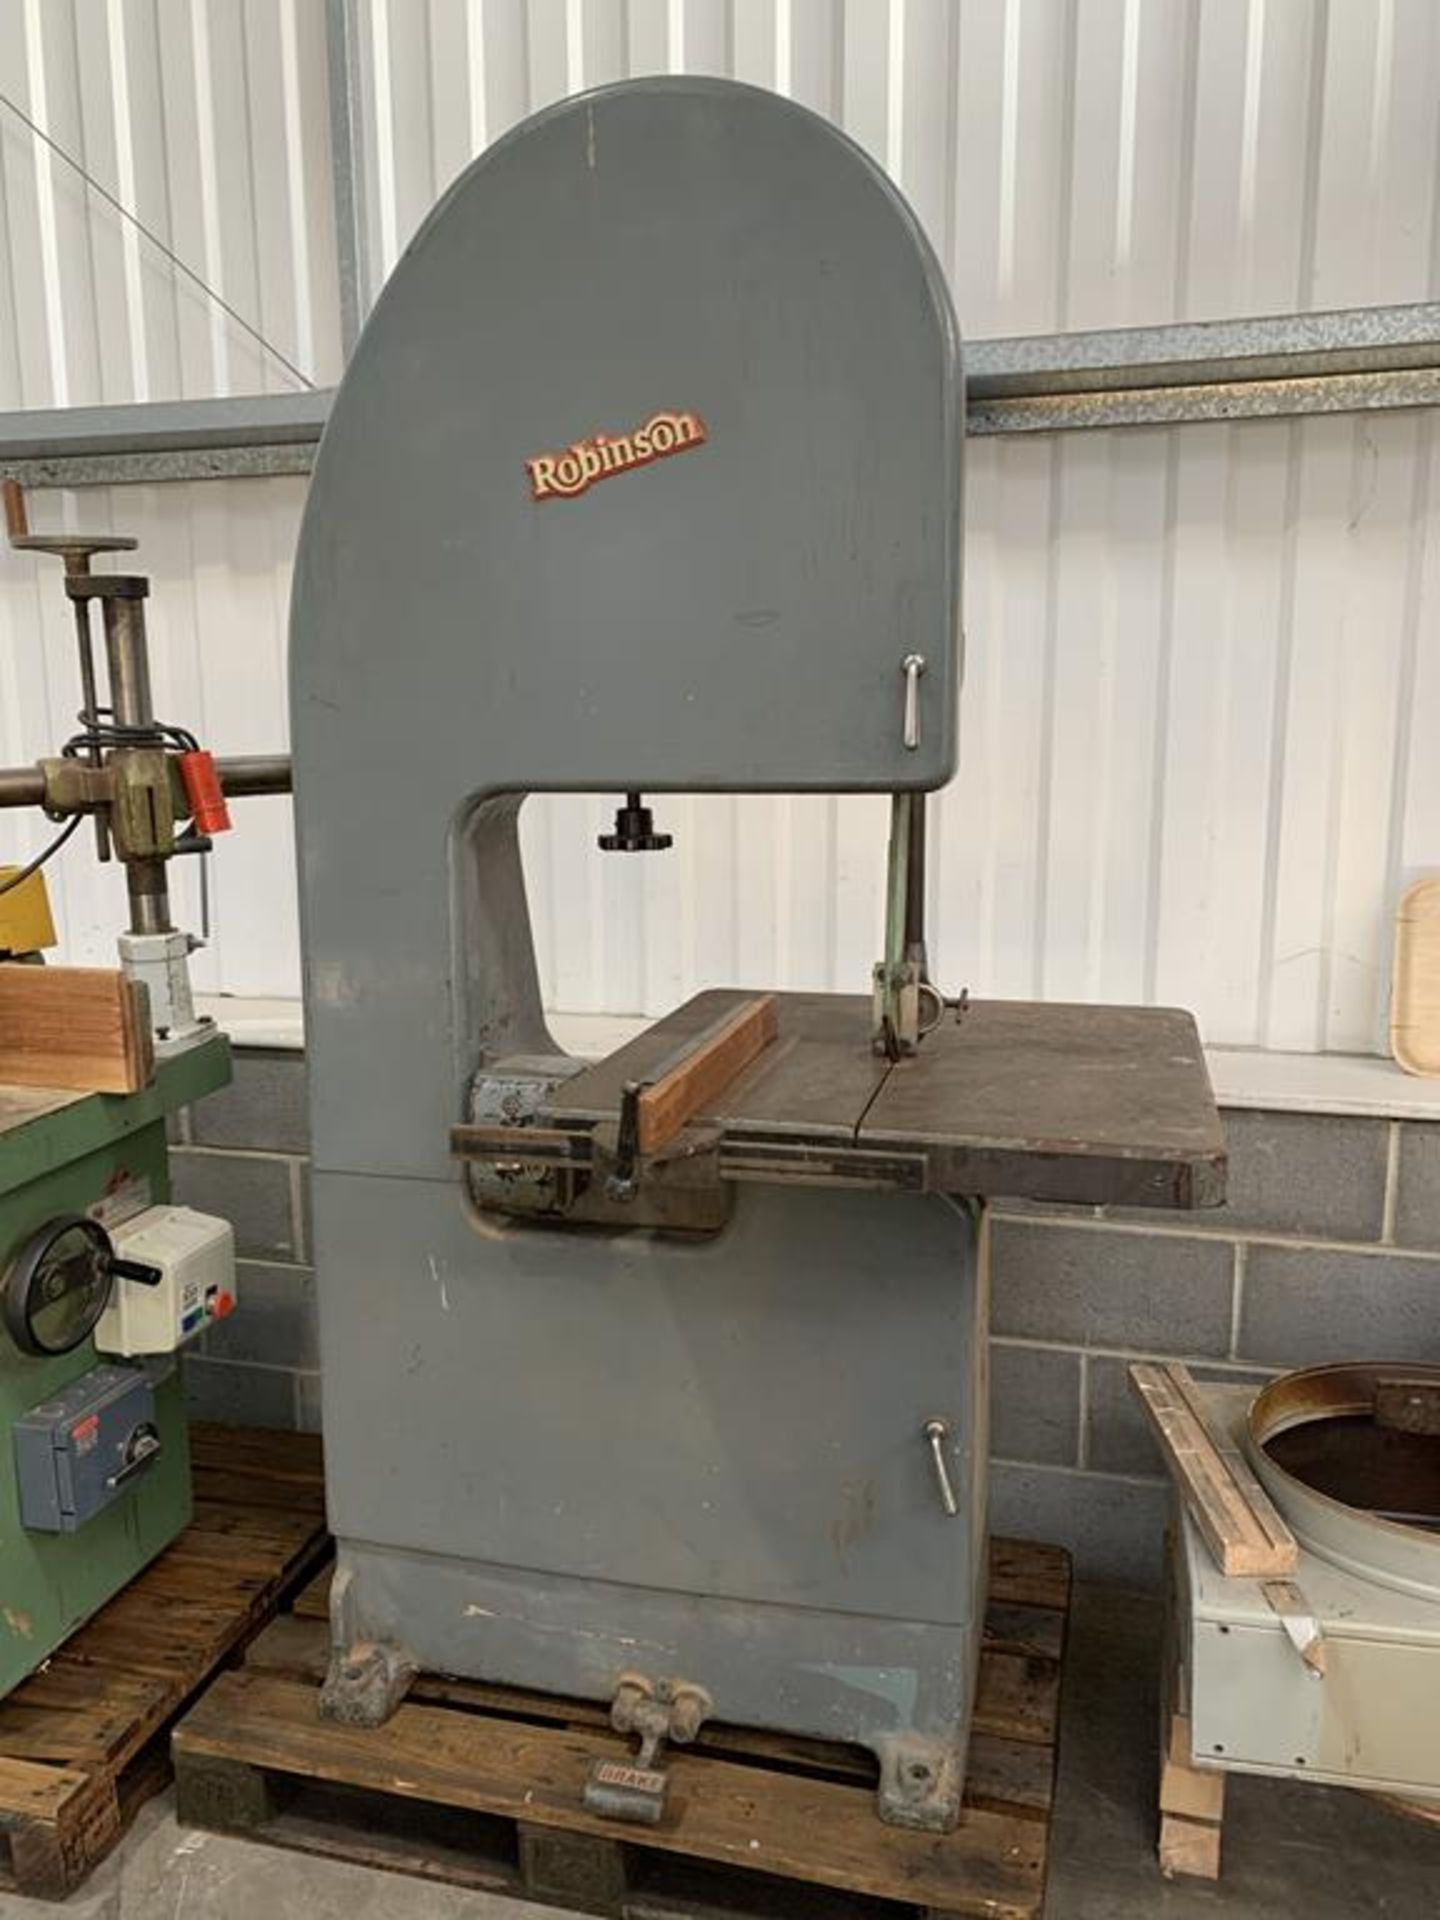 Robinson Heavy Duty Vertical Bandsaw with Foot Brake. 3phase